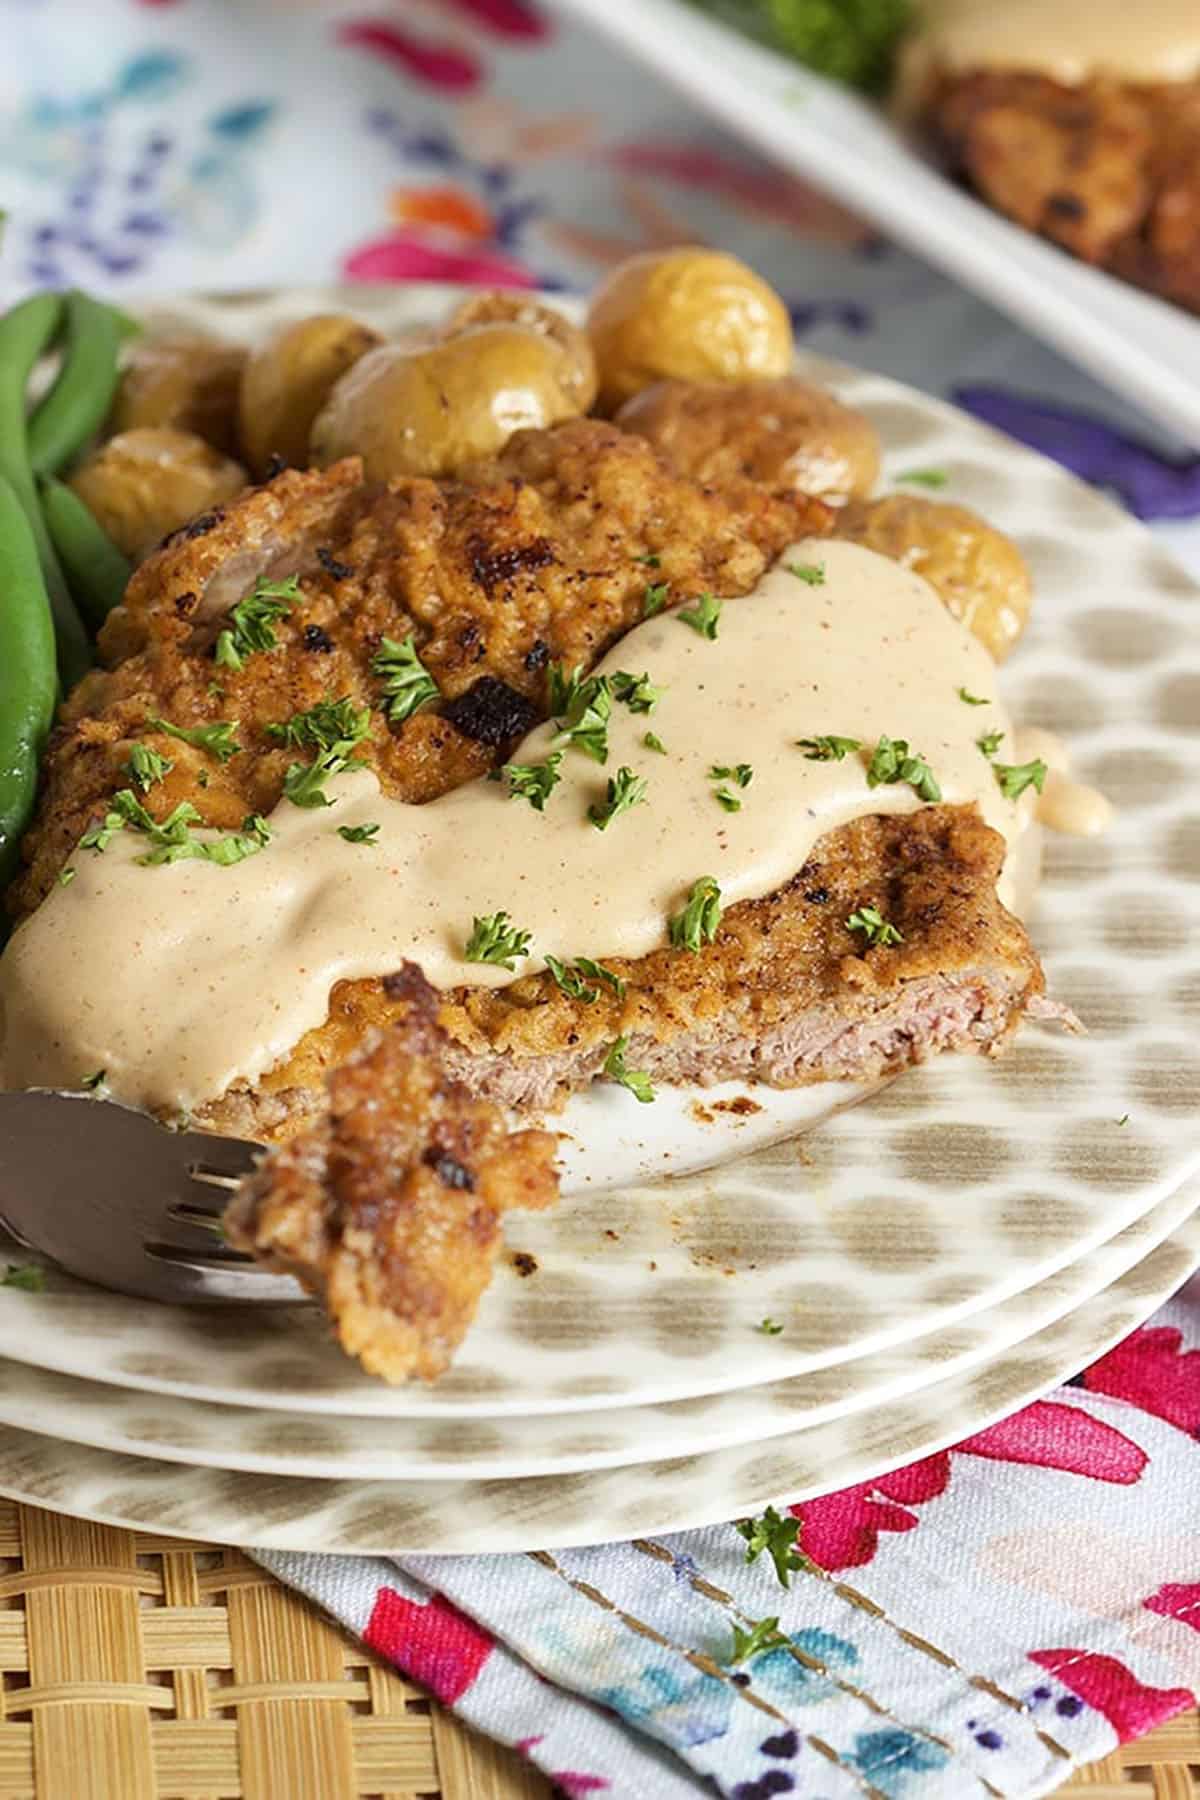 Chicken fried steak with a bite on a fork.